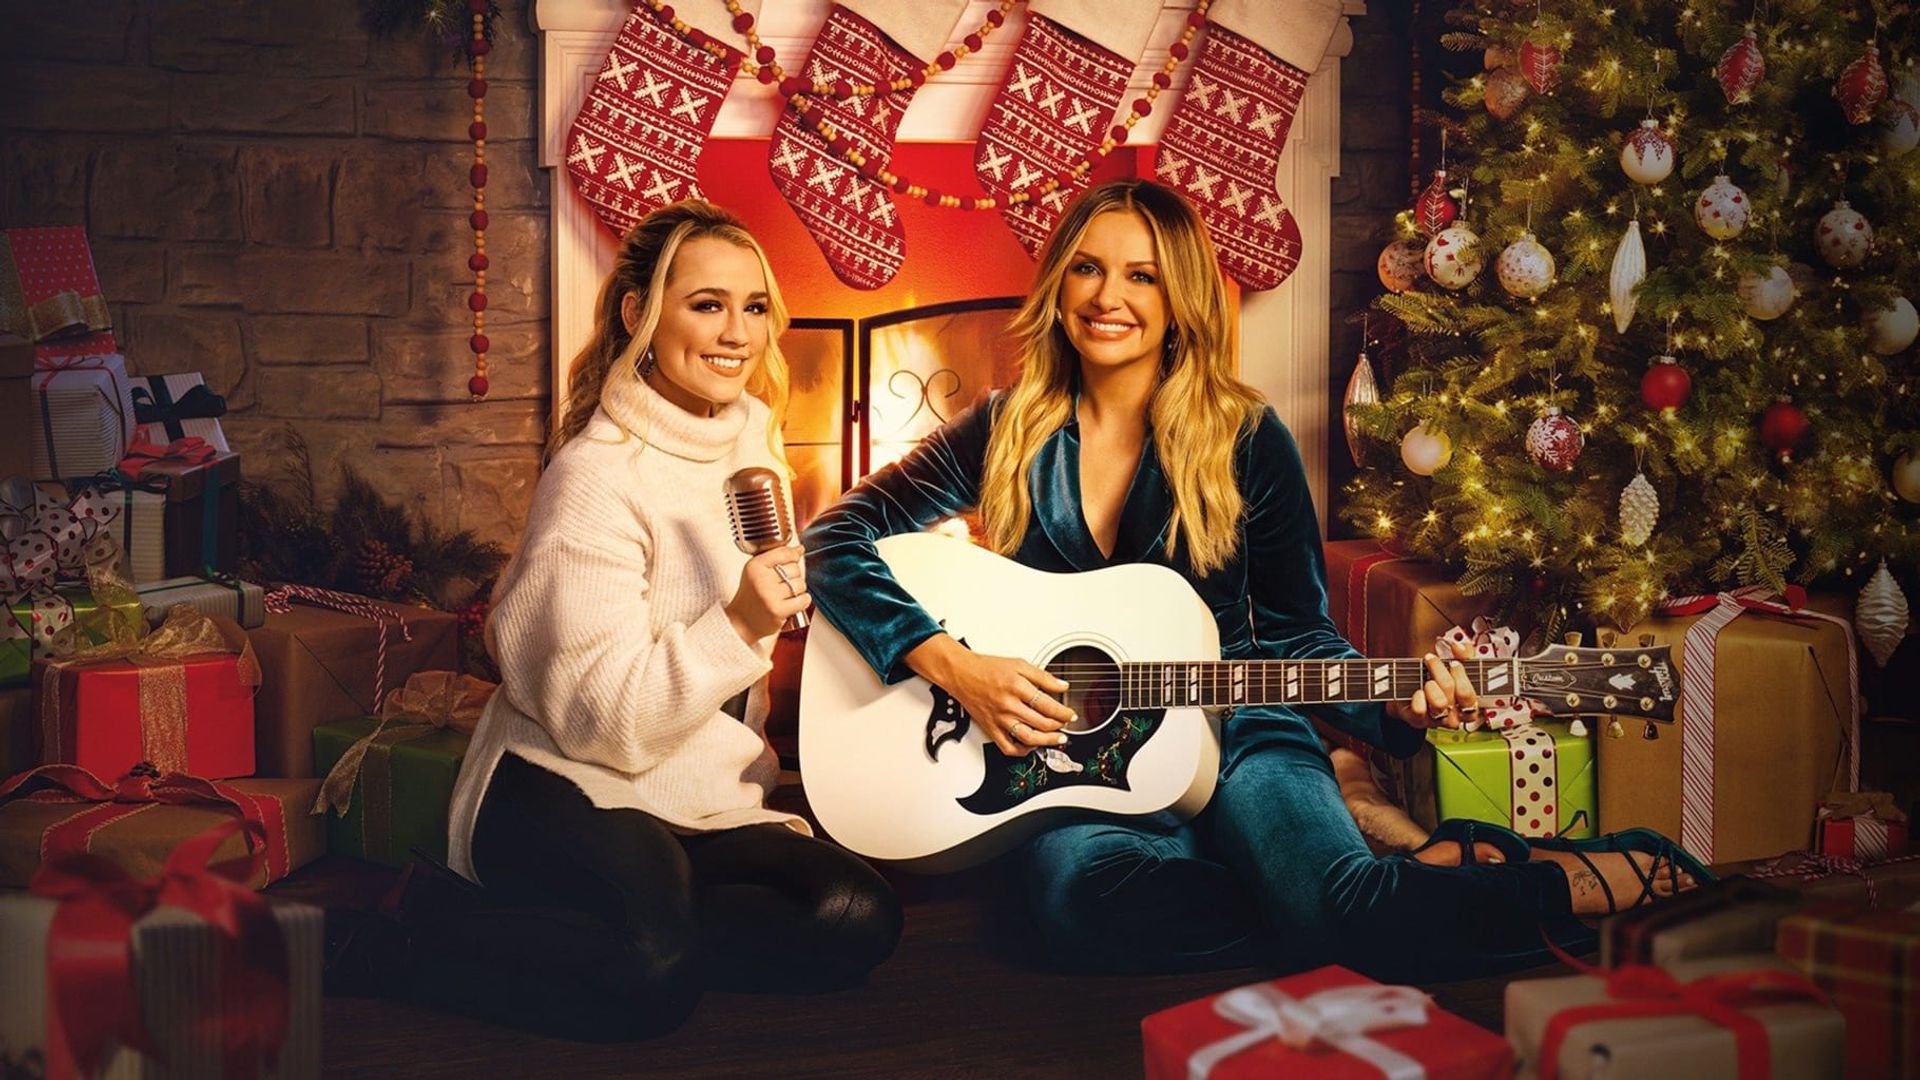 CMA Country Christmas background